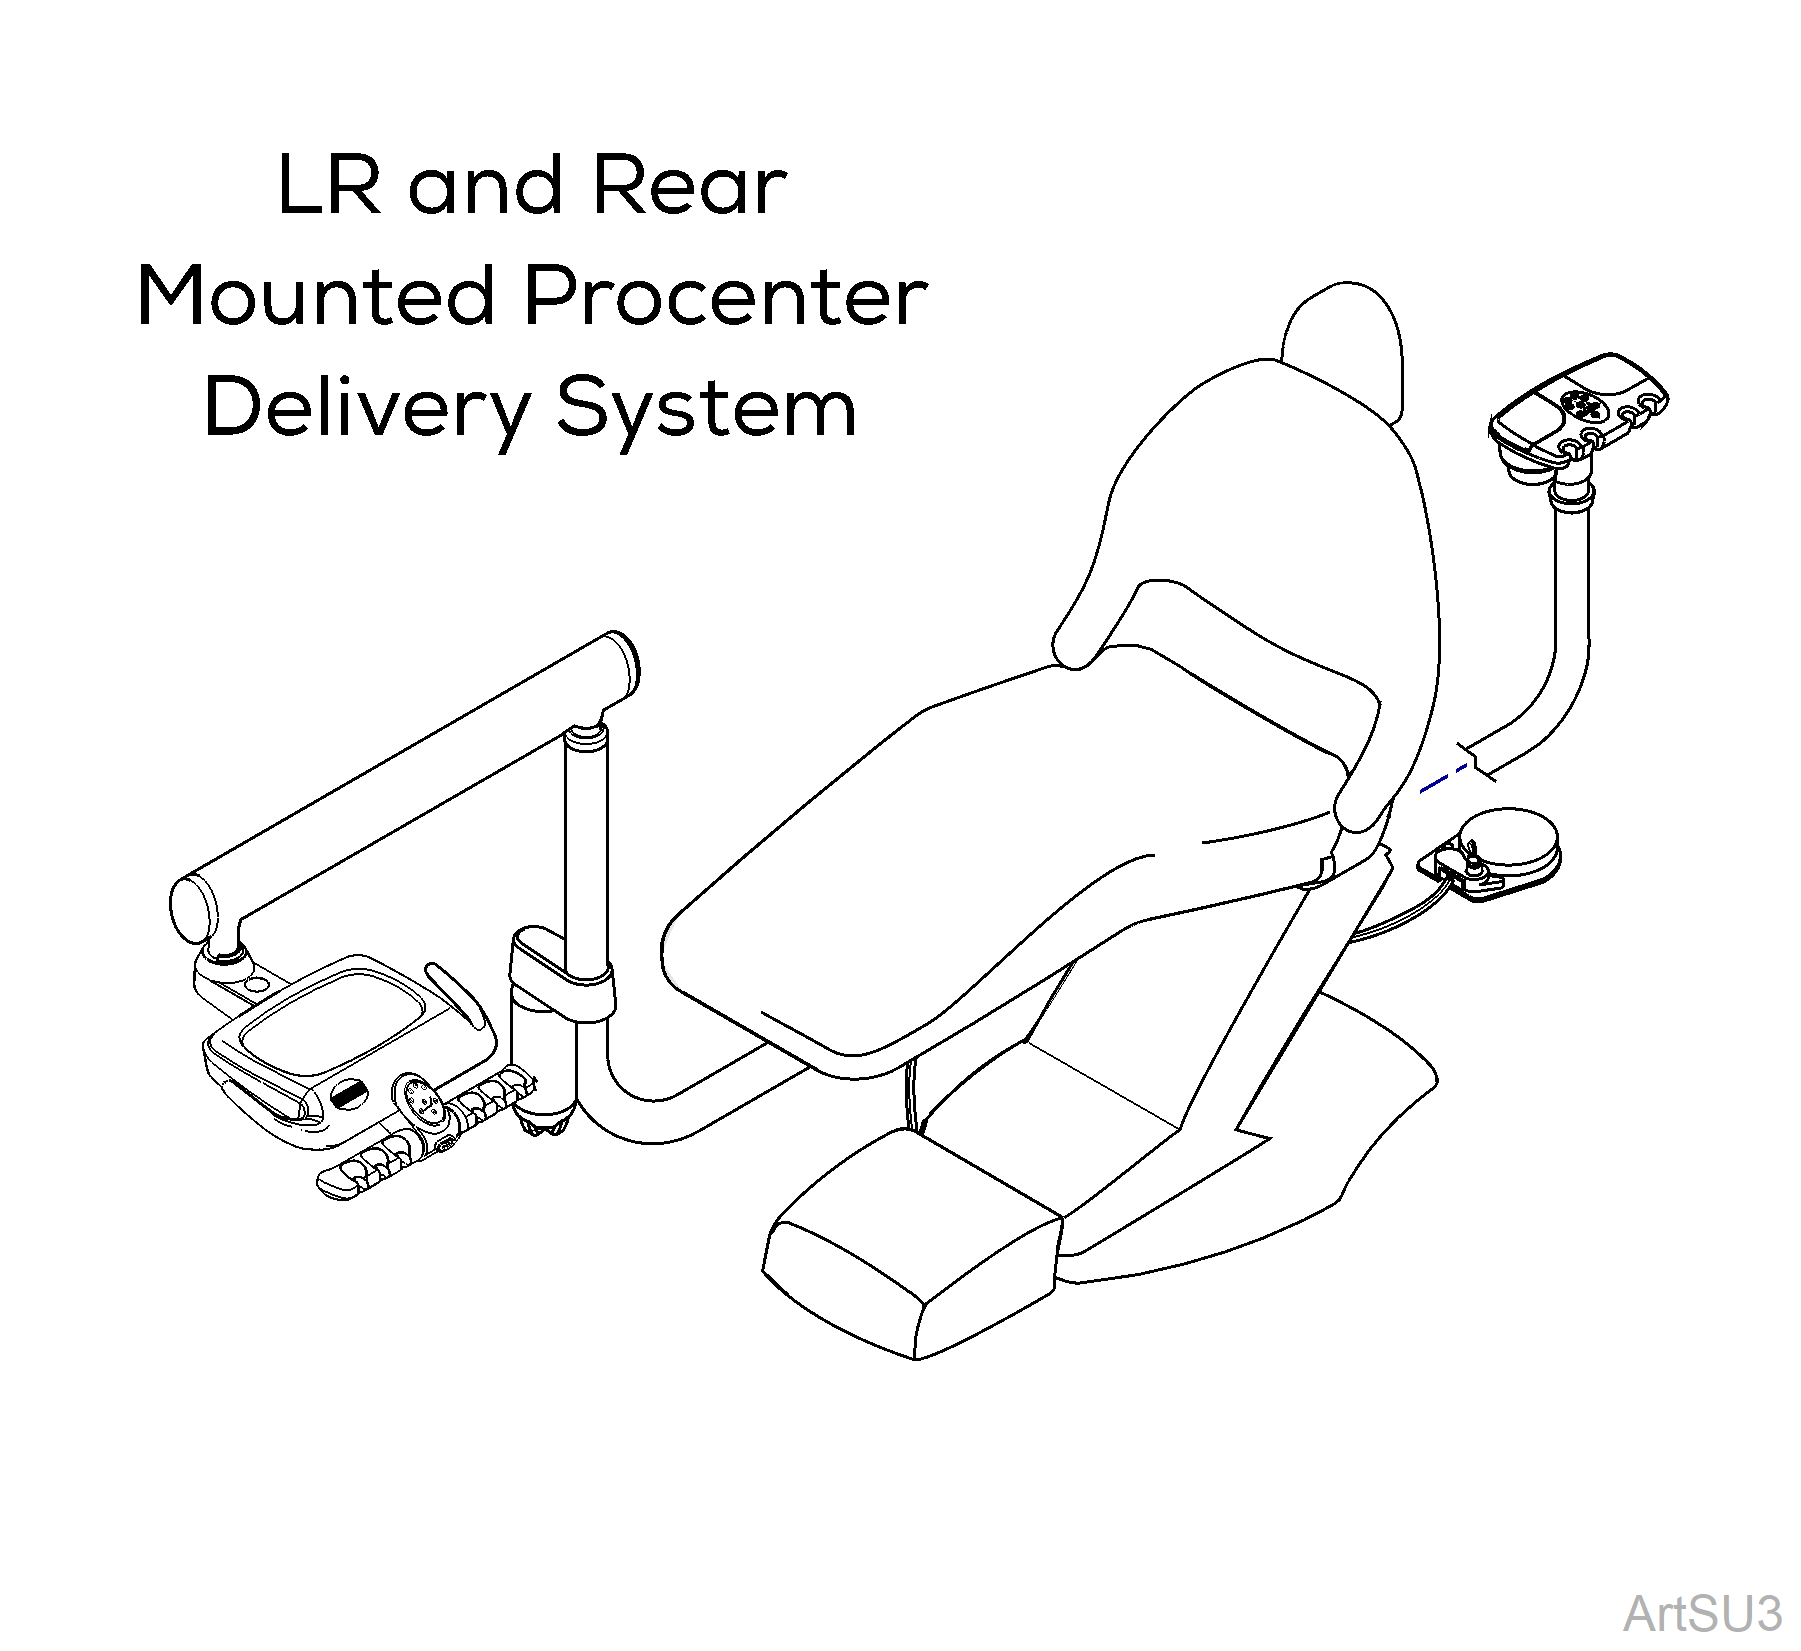 LR Mounted  Procenter Delivery System